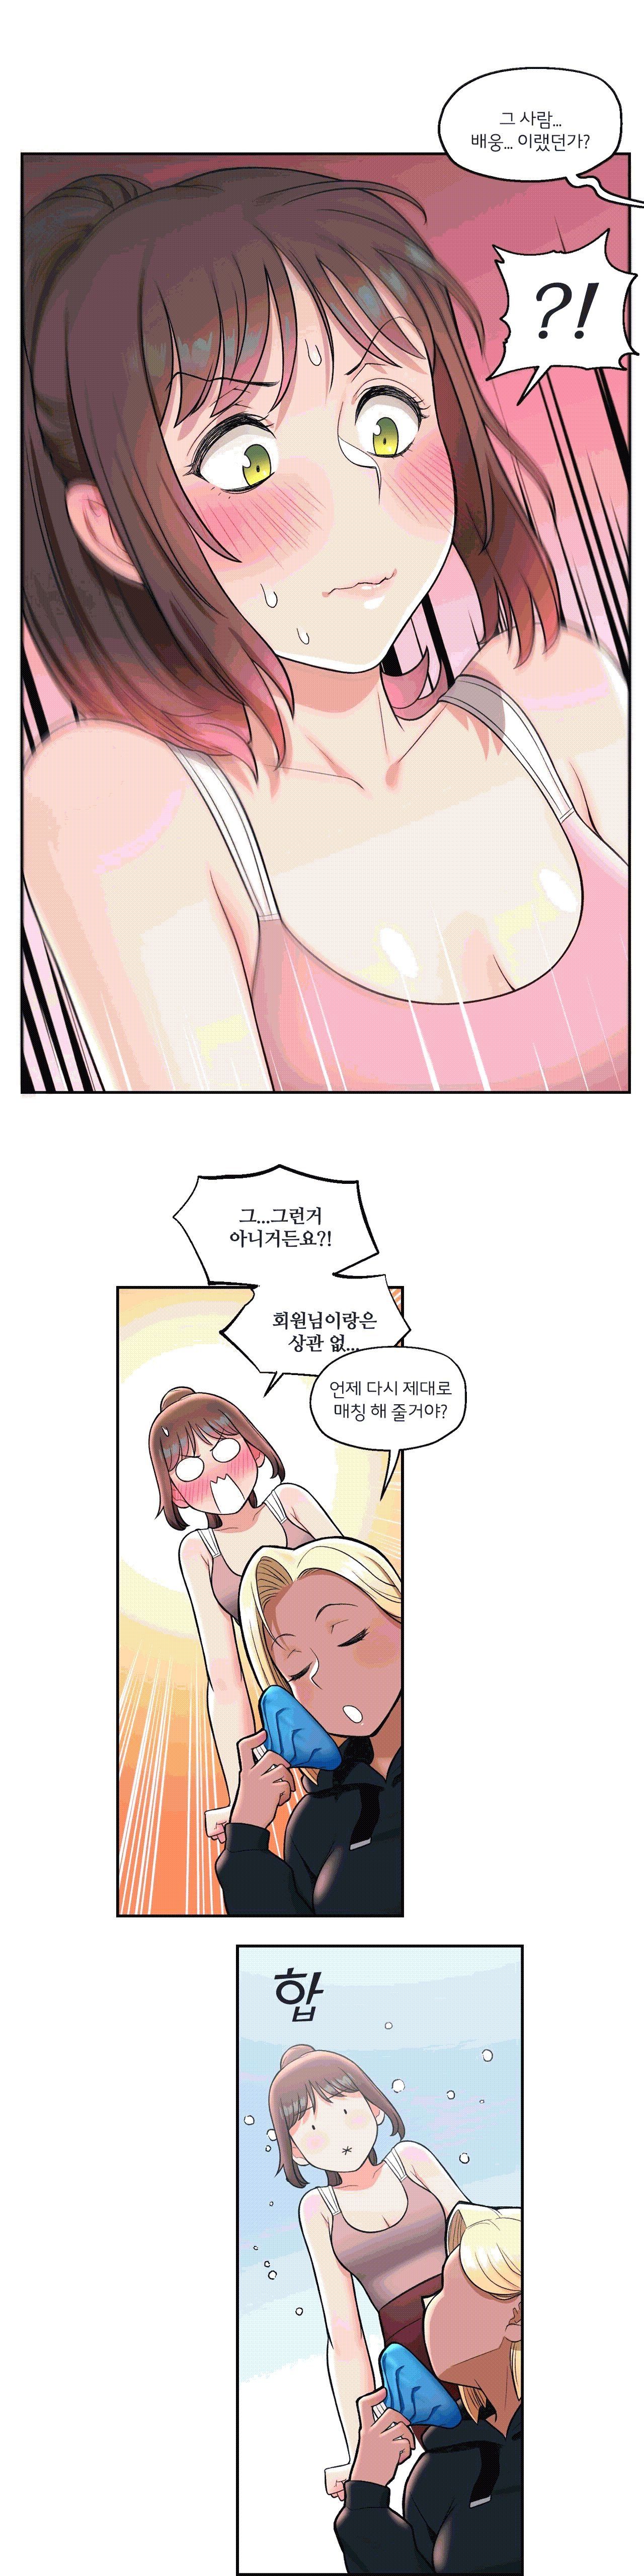 Sexercise Raw - Chapter 30 Page 6